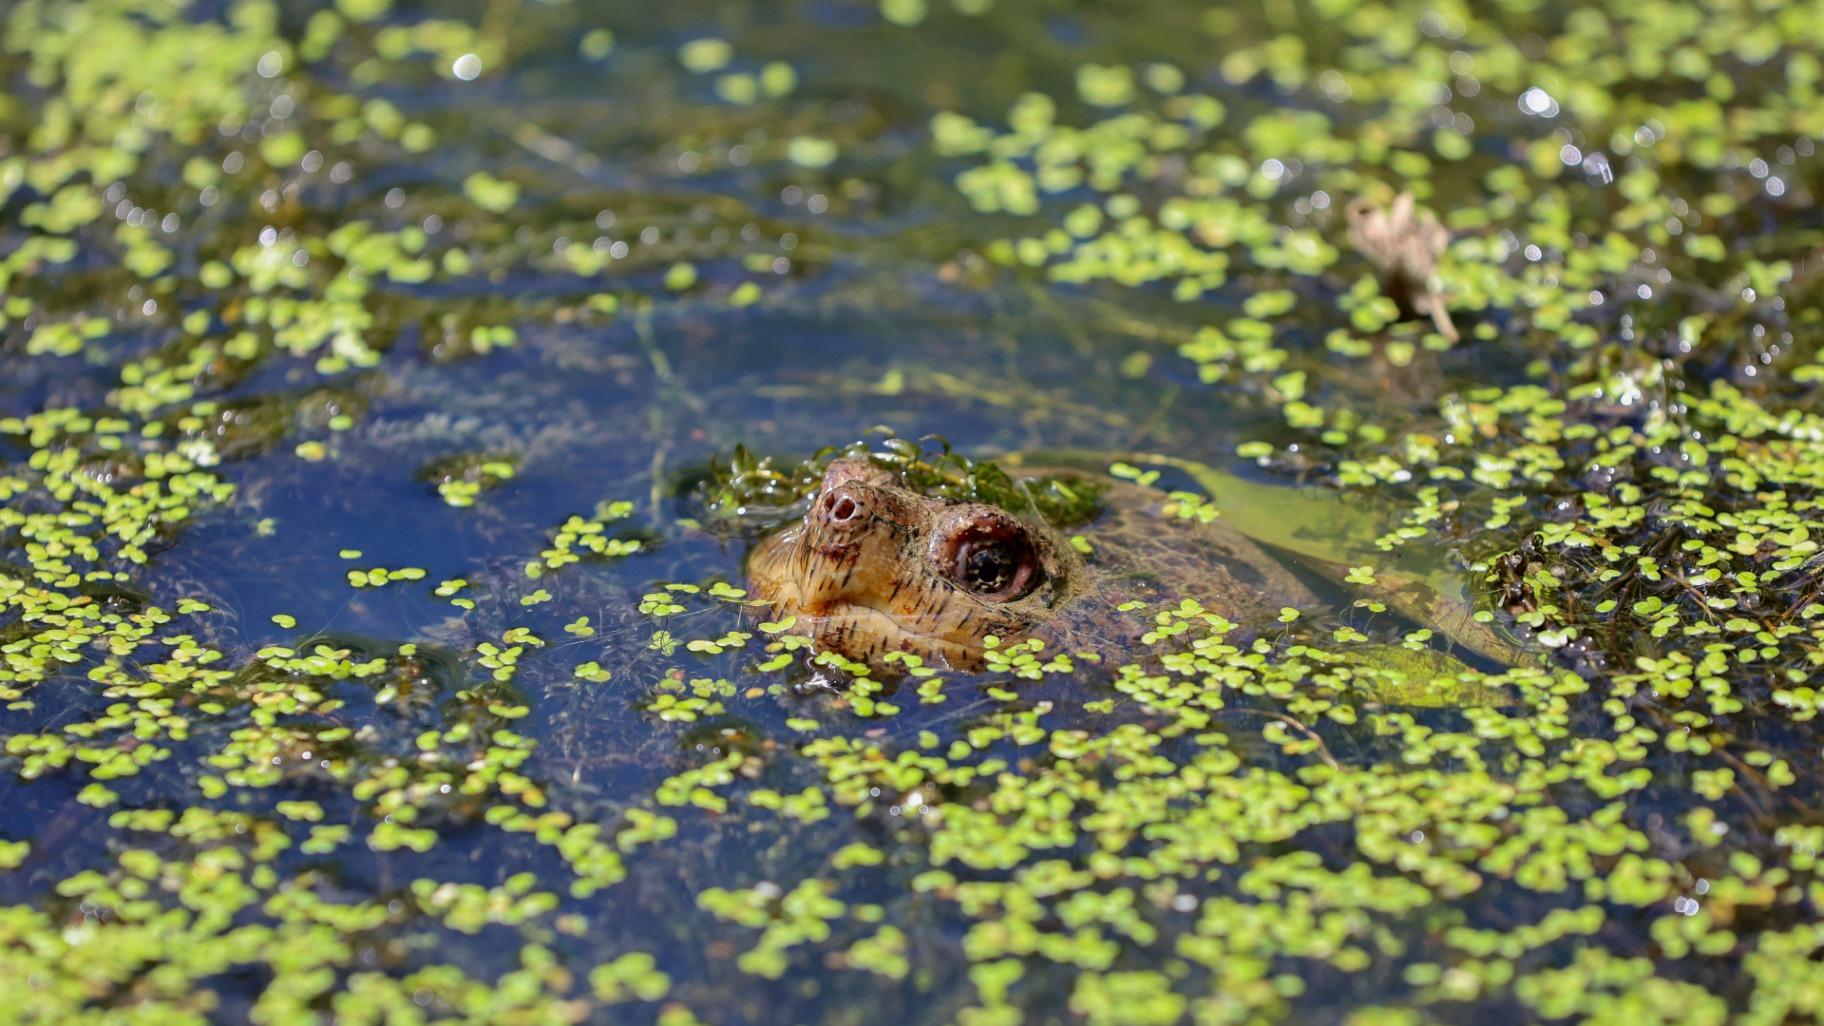 FILE - A turtle pokes its nose out of the water in the wetlands inside Sugar Hollow Park in Bristol, Va., June 12, 2023. (Emily Ball / Bristol Herald Courier via AP, File)